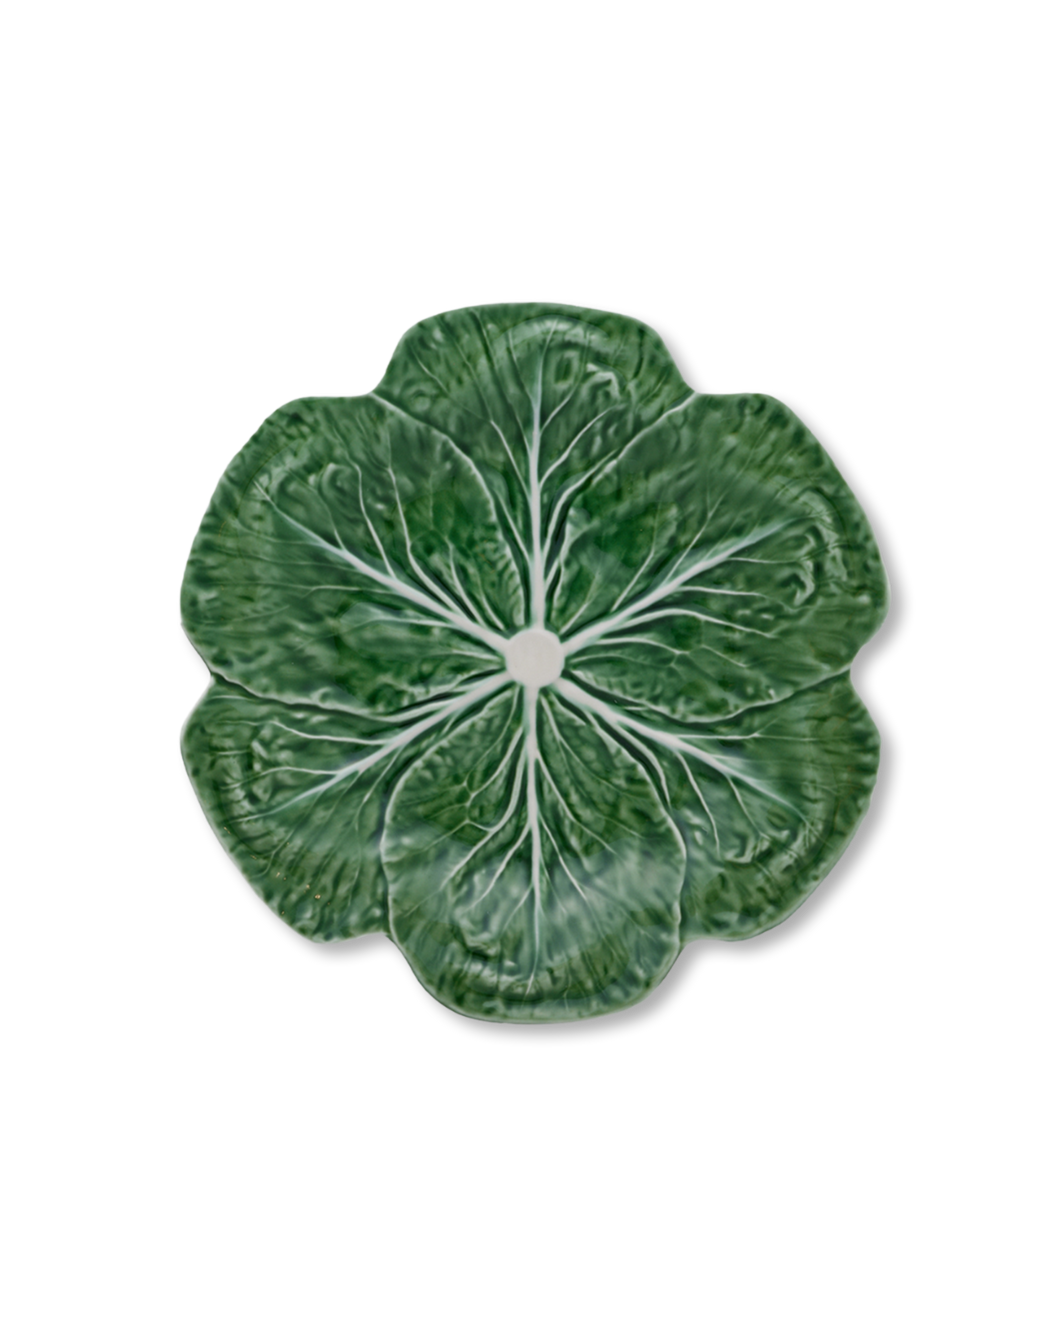 Green Cabbage Dinner Plate Available for Rent, Wedding Registry, and Purchase at Maison de Carine